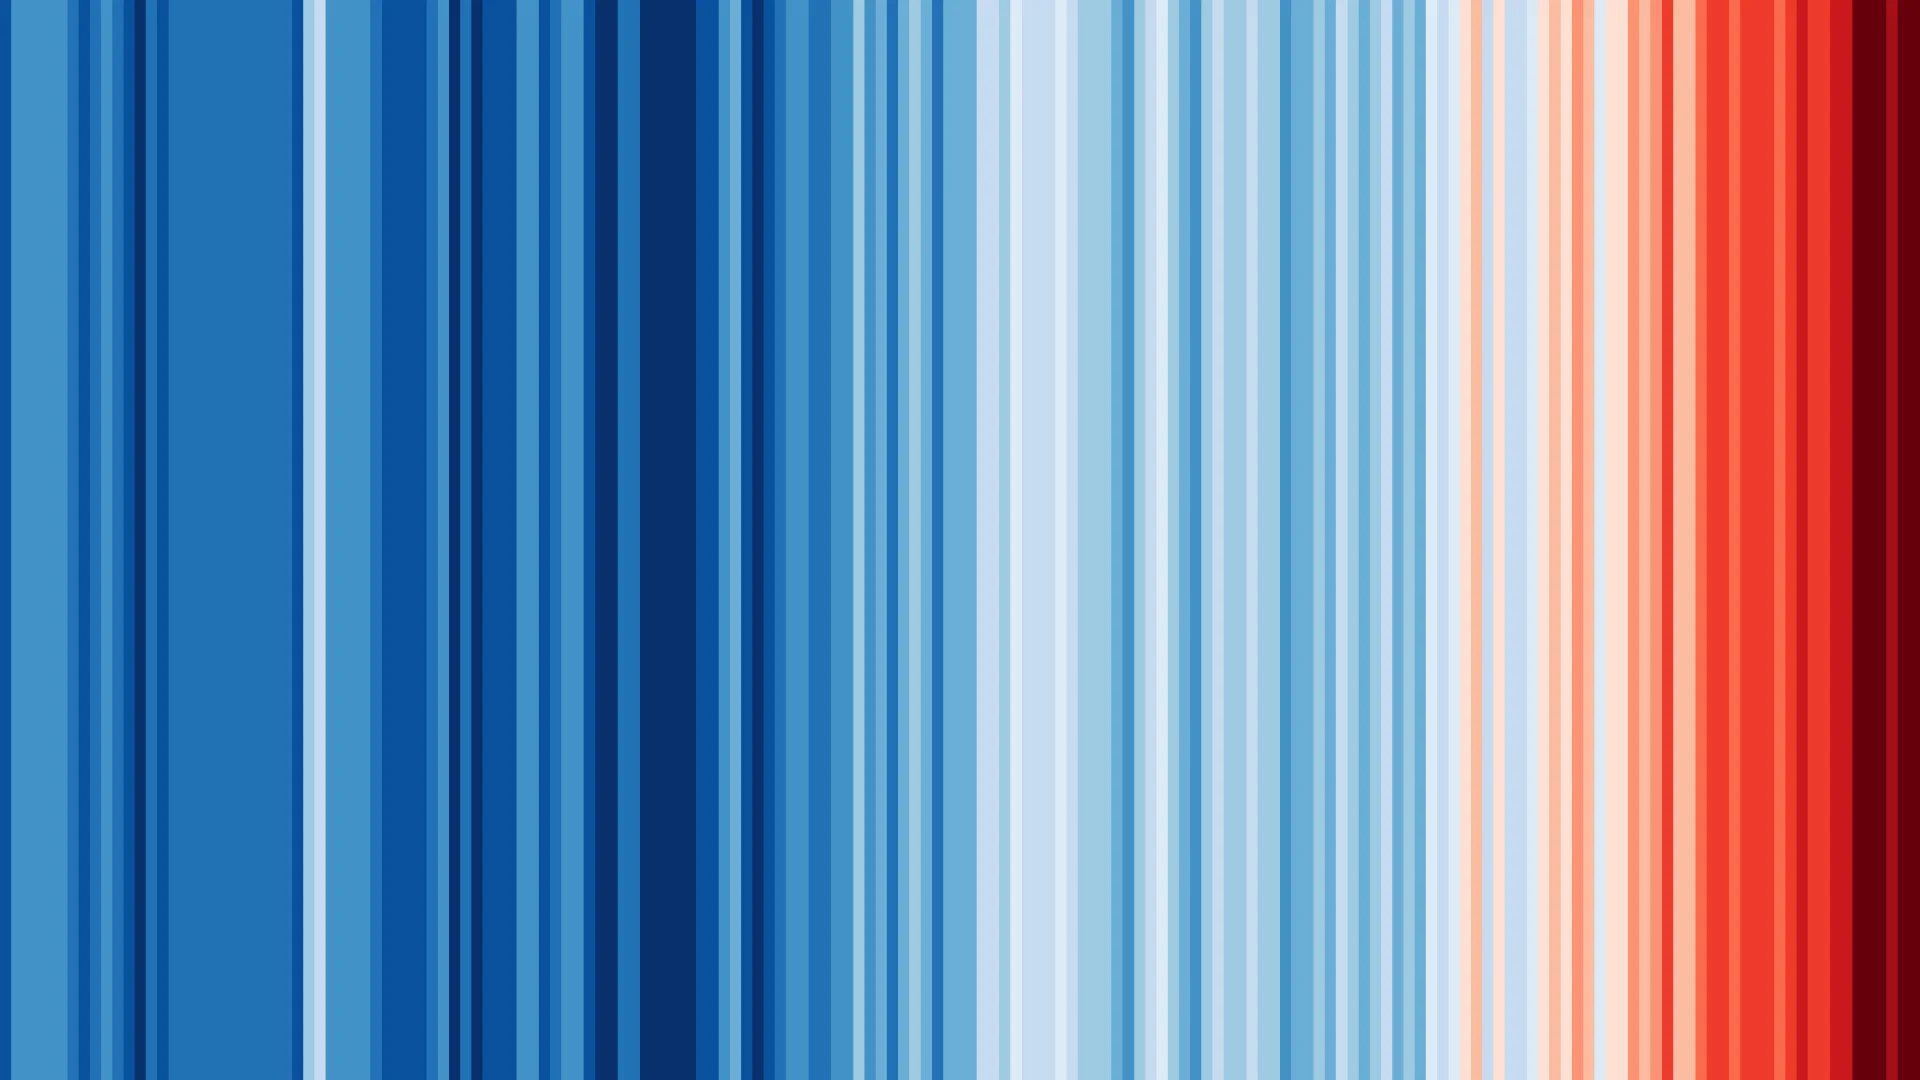 Warming stripes show over 100 years of climate change at a glance